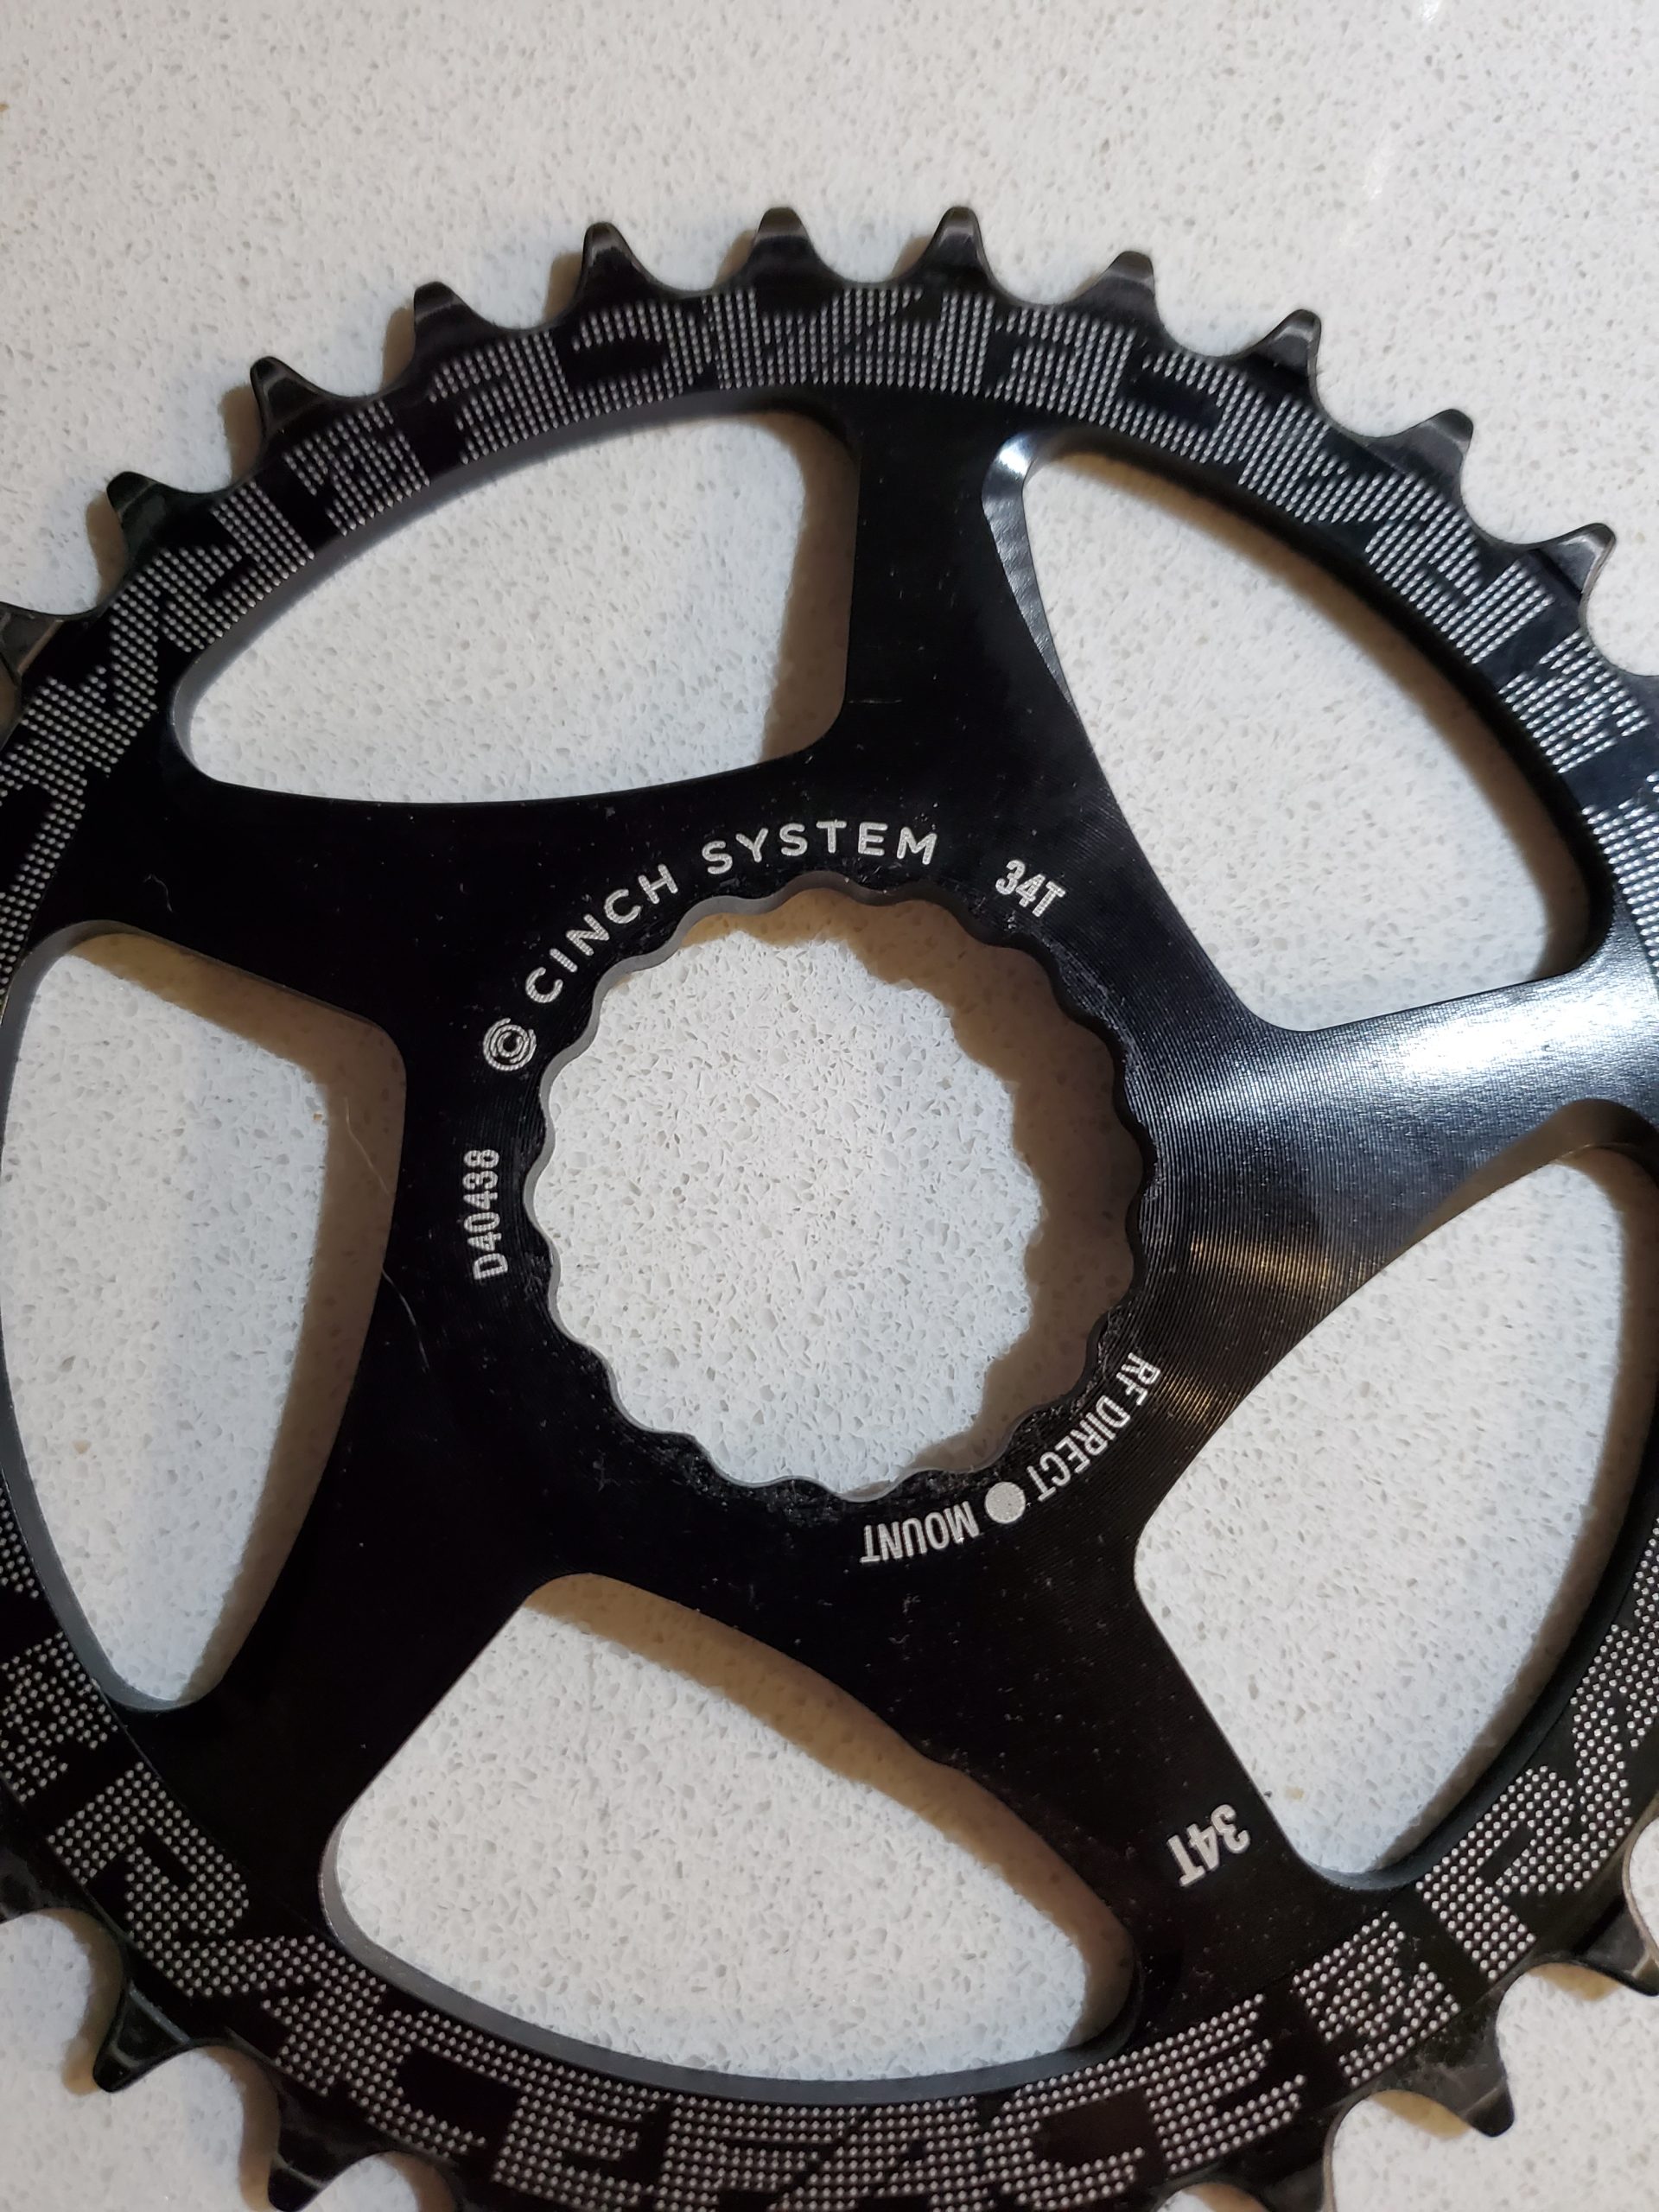 Raceface 34T Cinch System Direct Mount Chainring